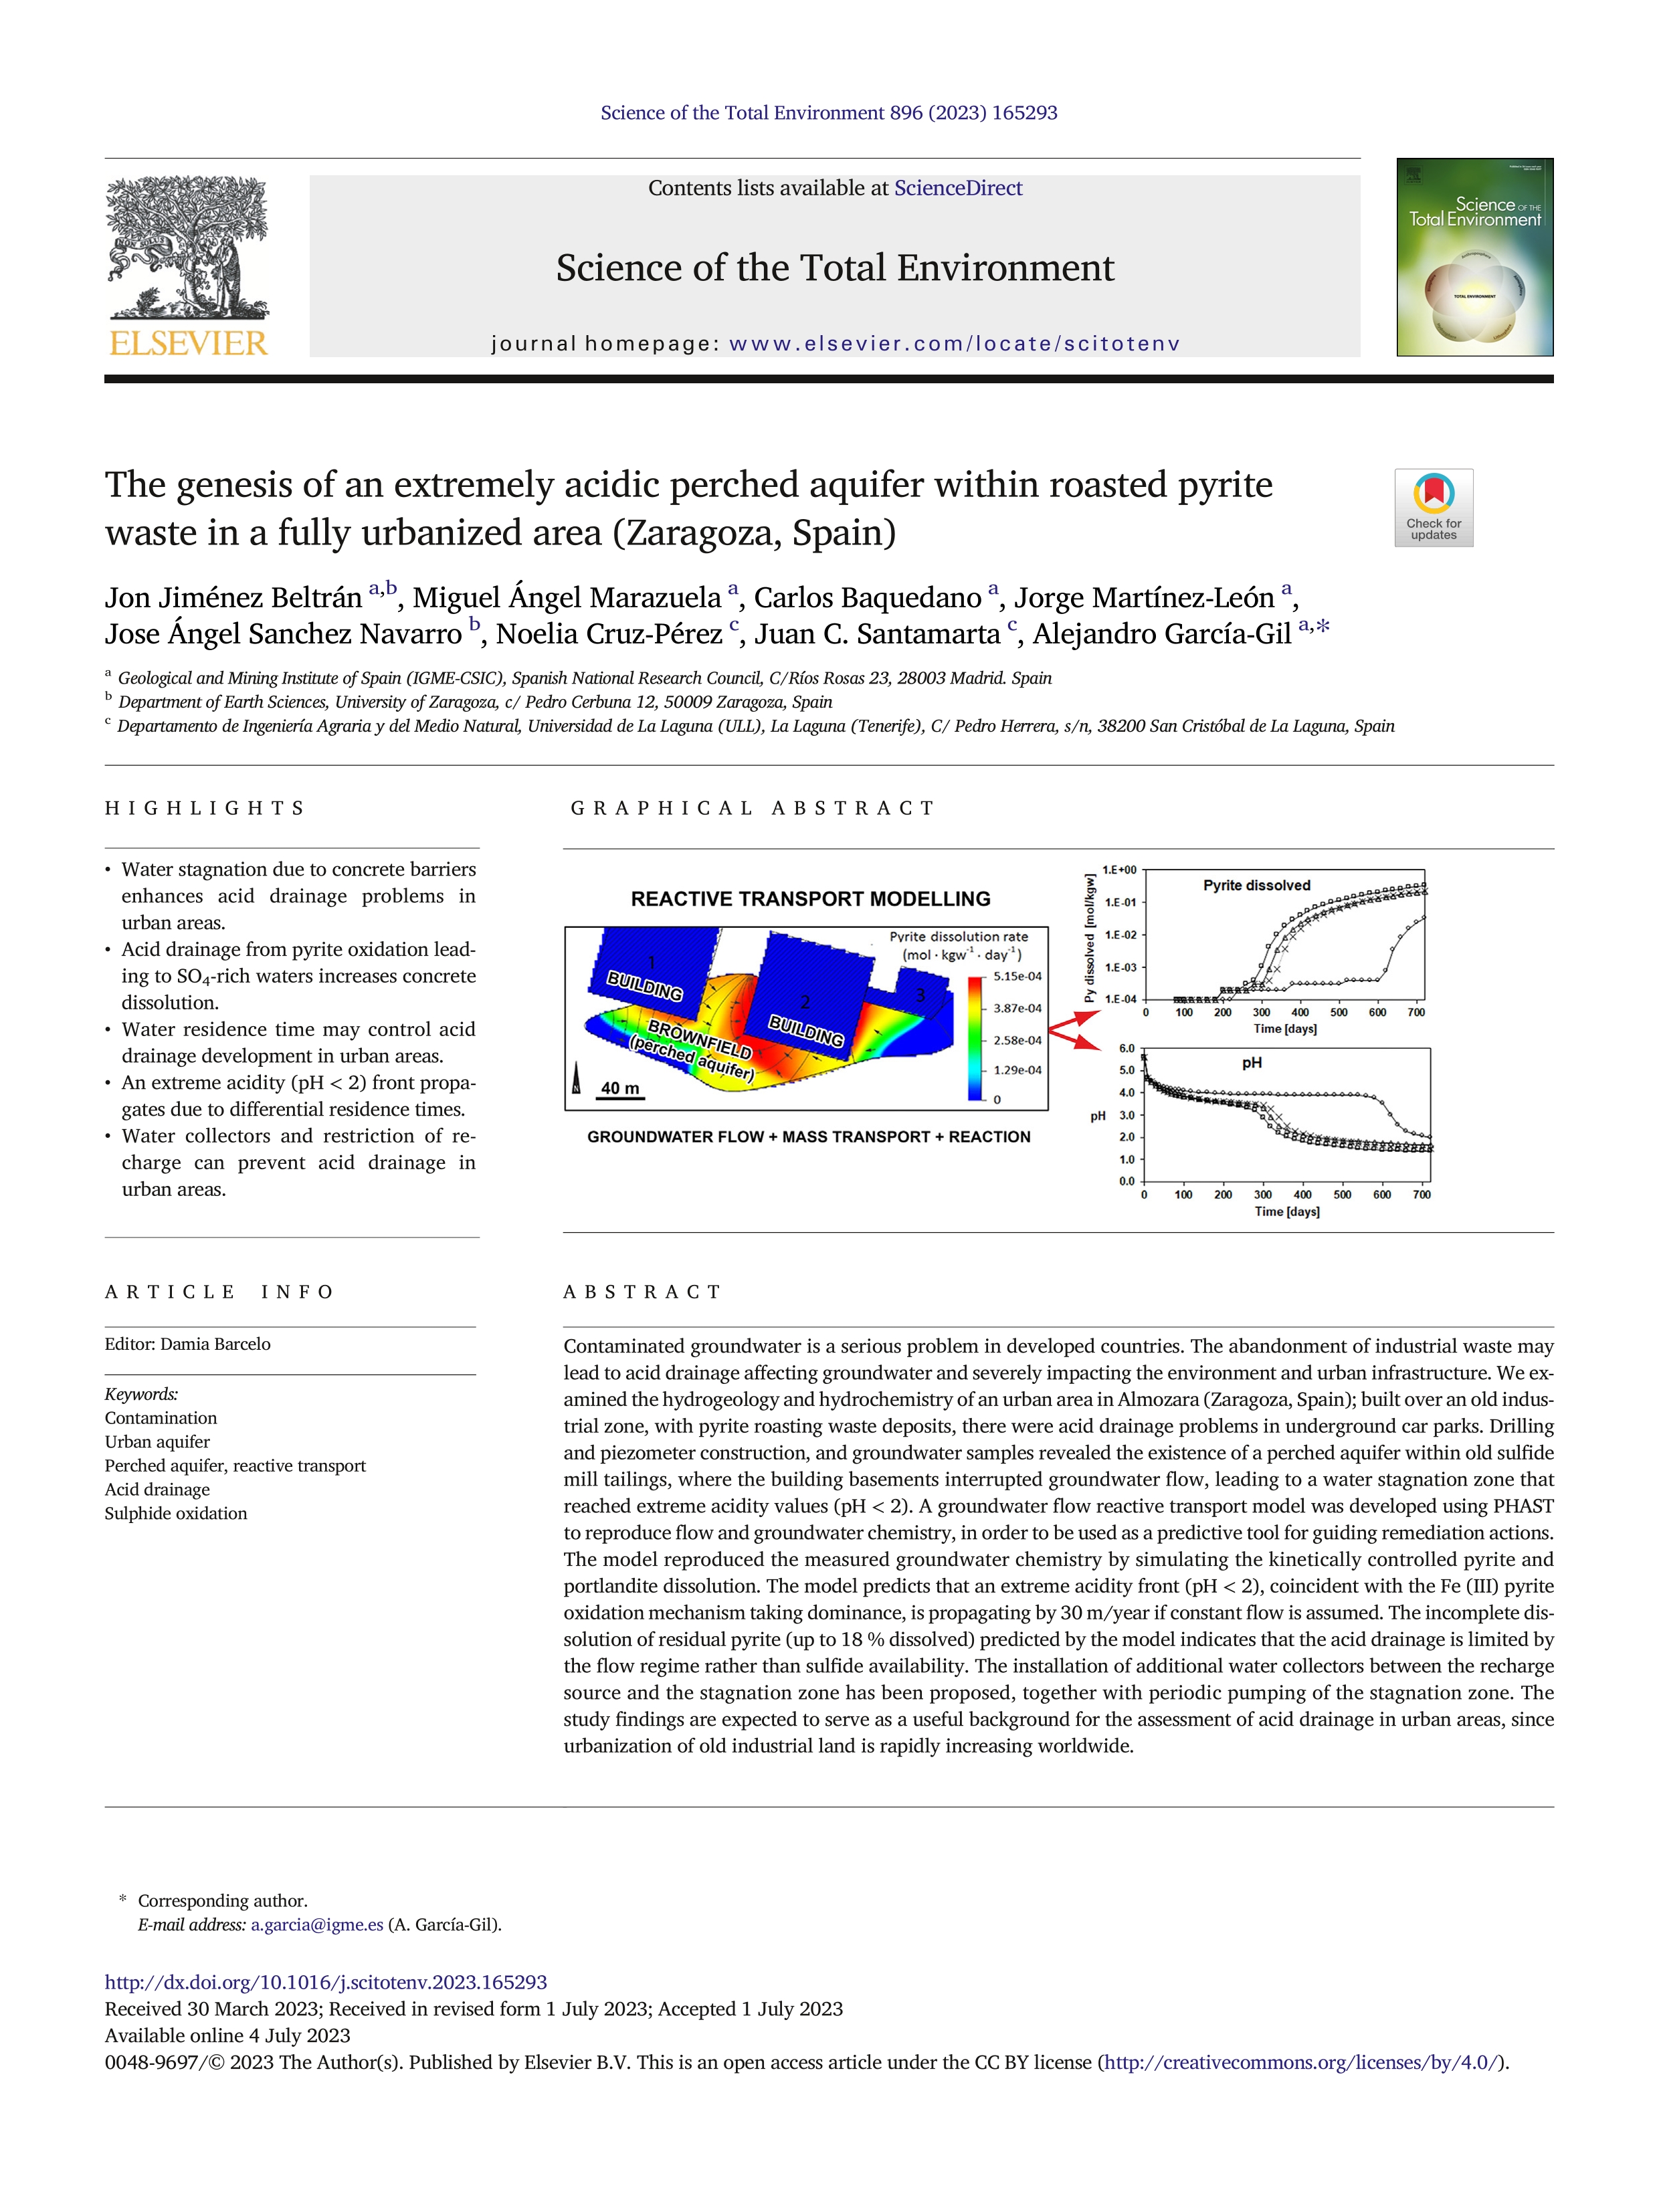 The genesis of an extremely acidic perched aquifer within roasted pyrite waste in a fully urbanized area (Zaragoza, Spain)